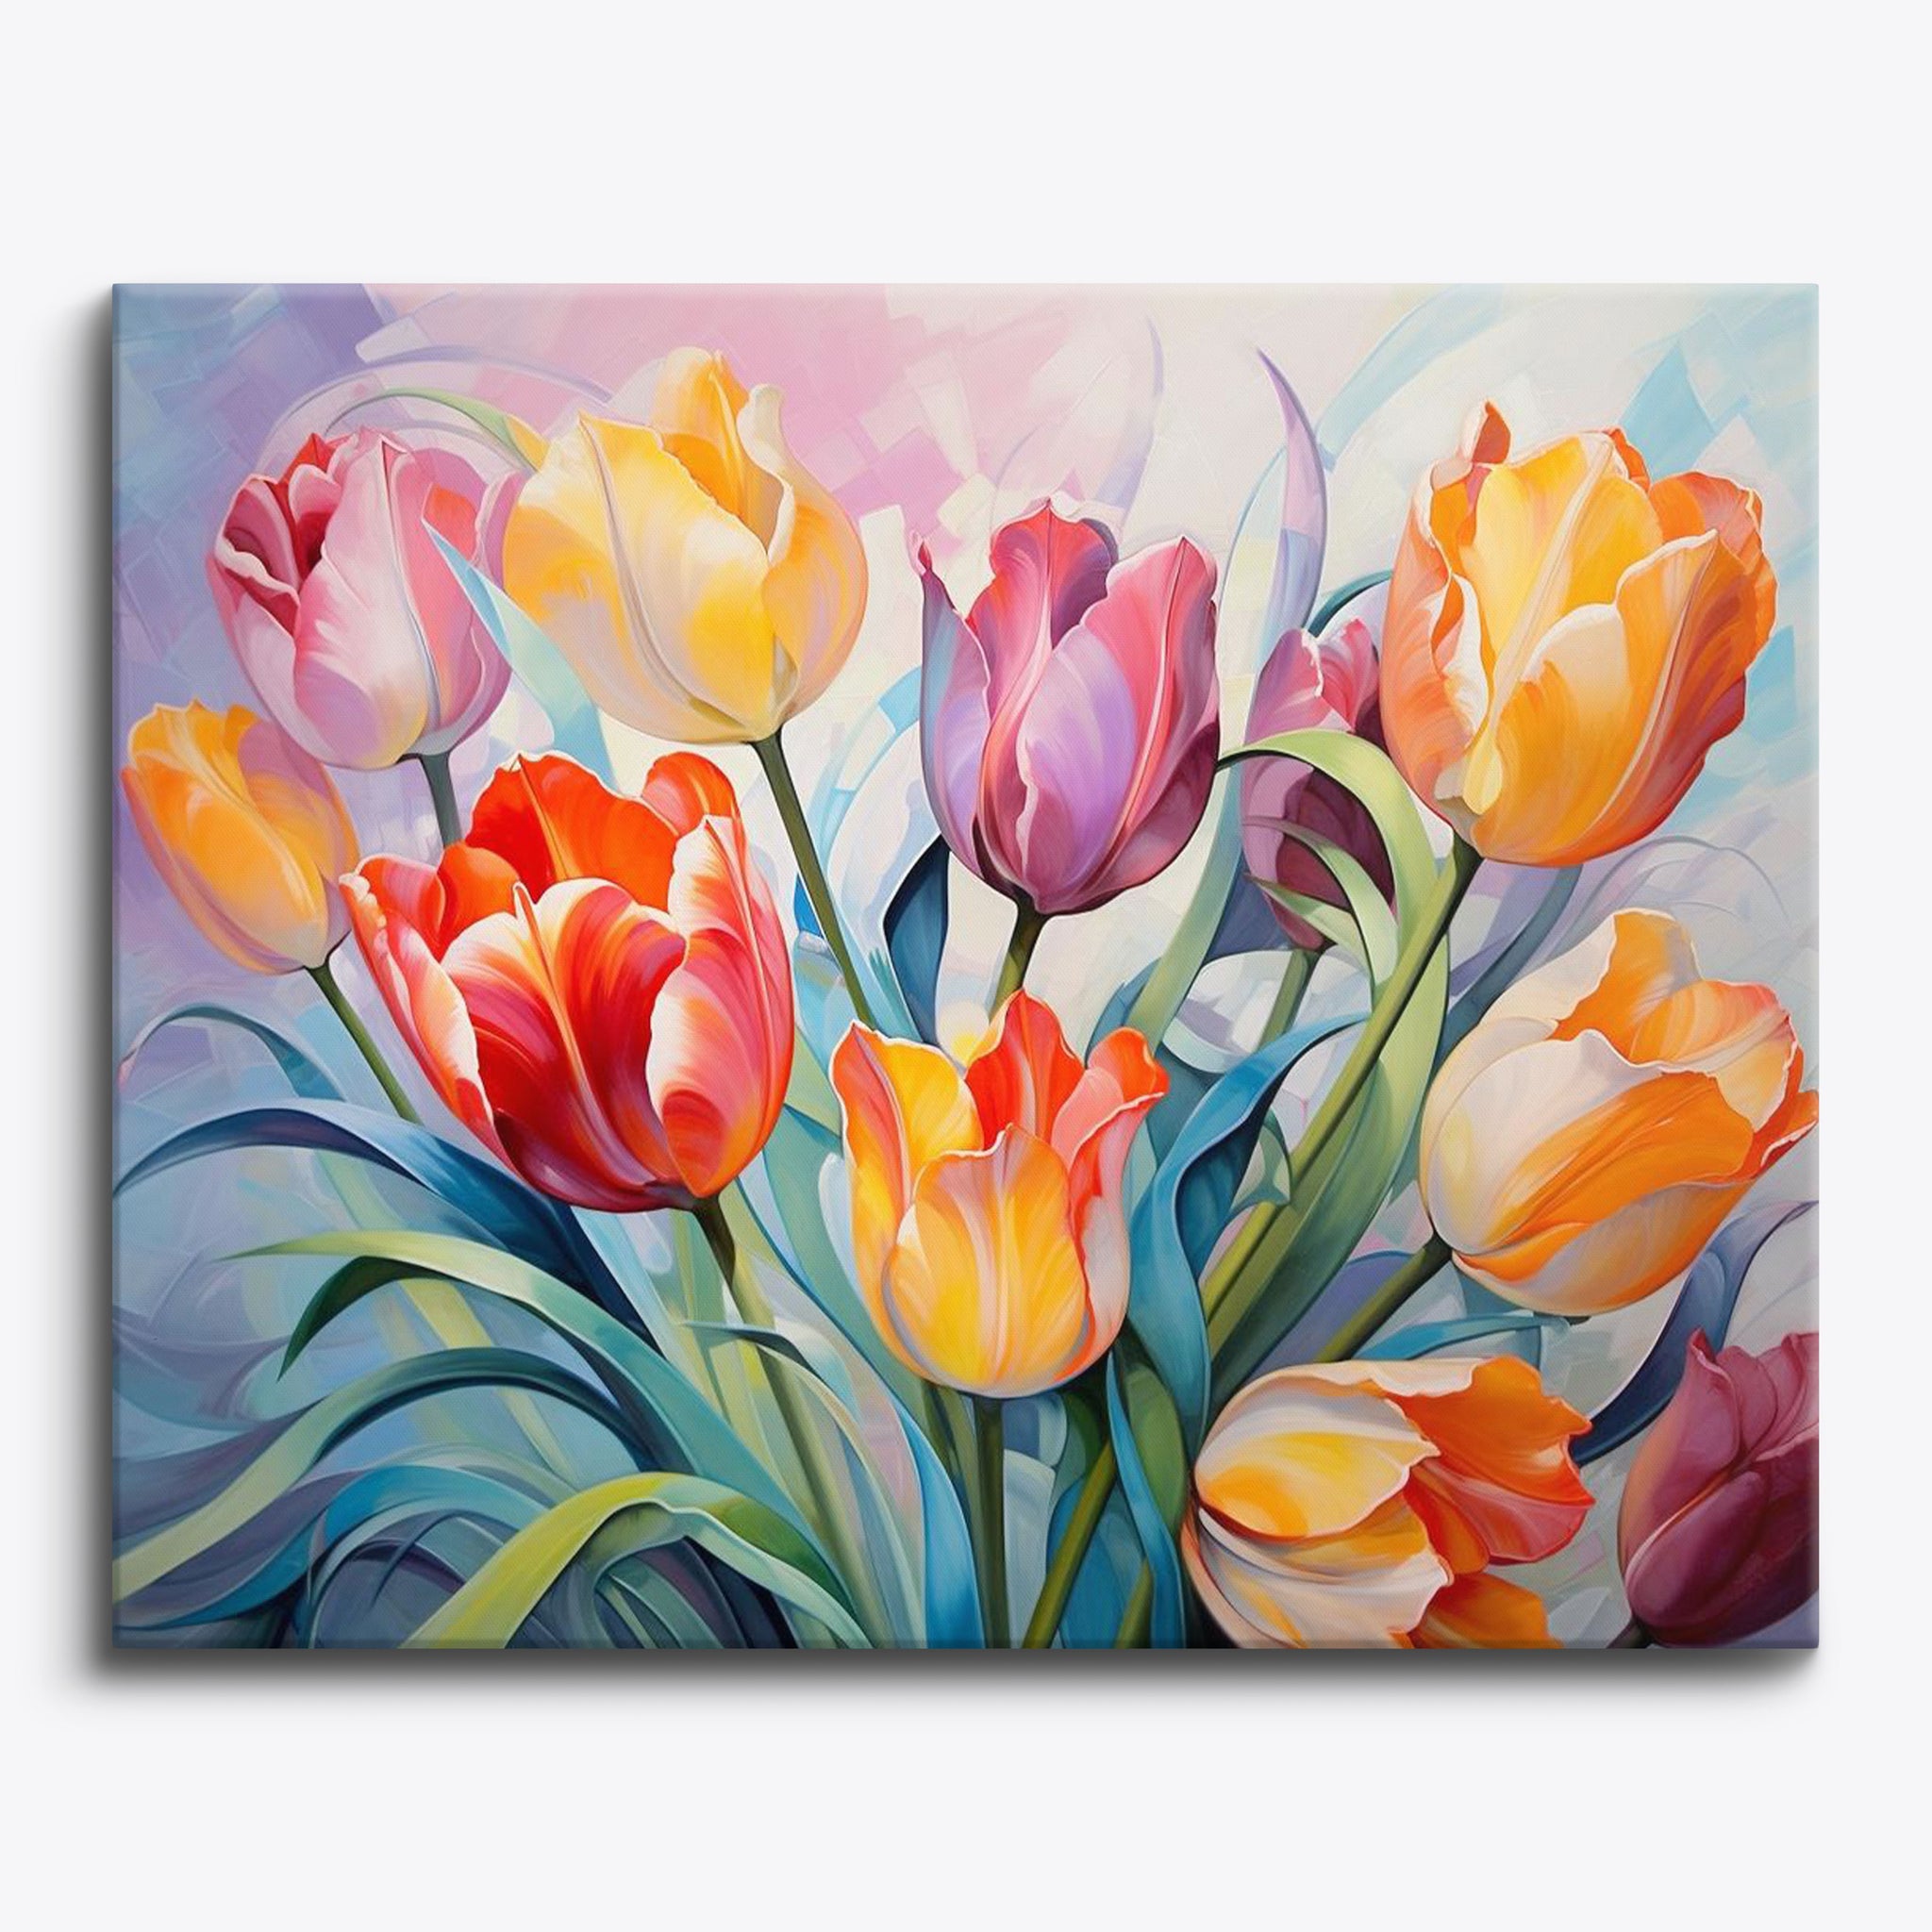 Tulip Garden Buds 6-Pc. Ornament Painting Kit – Tulip Color Crafts